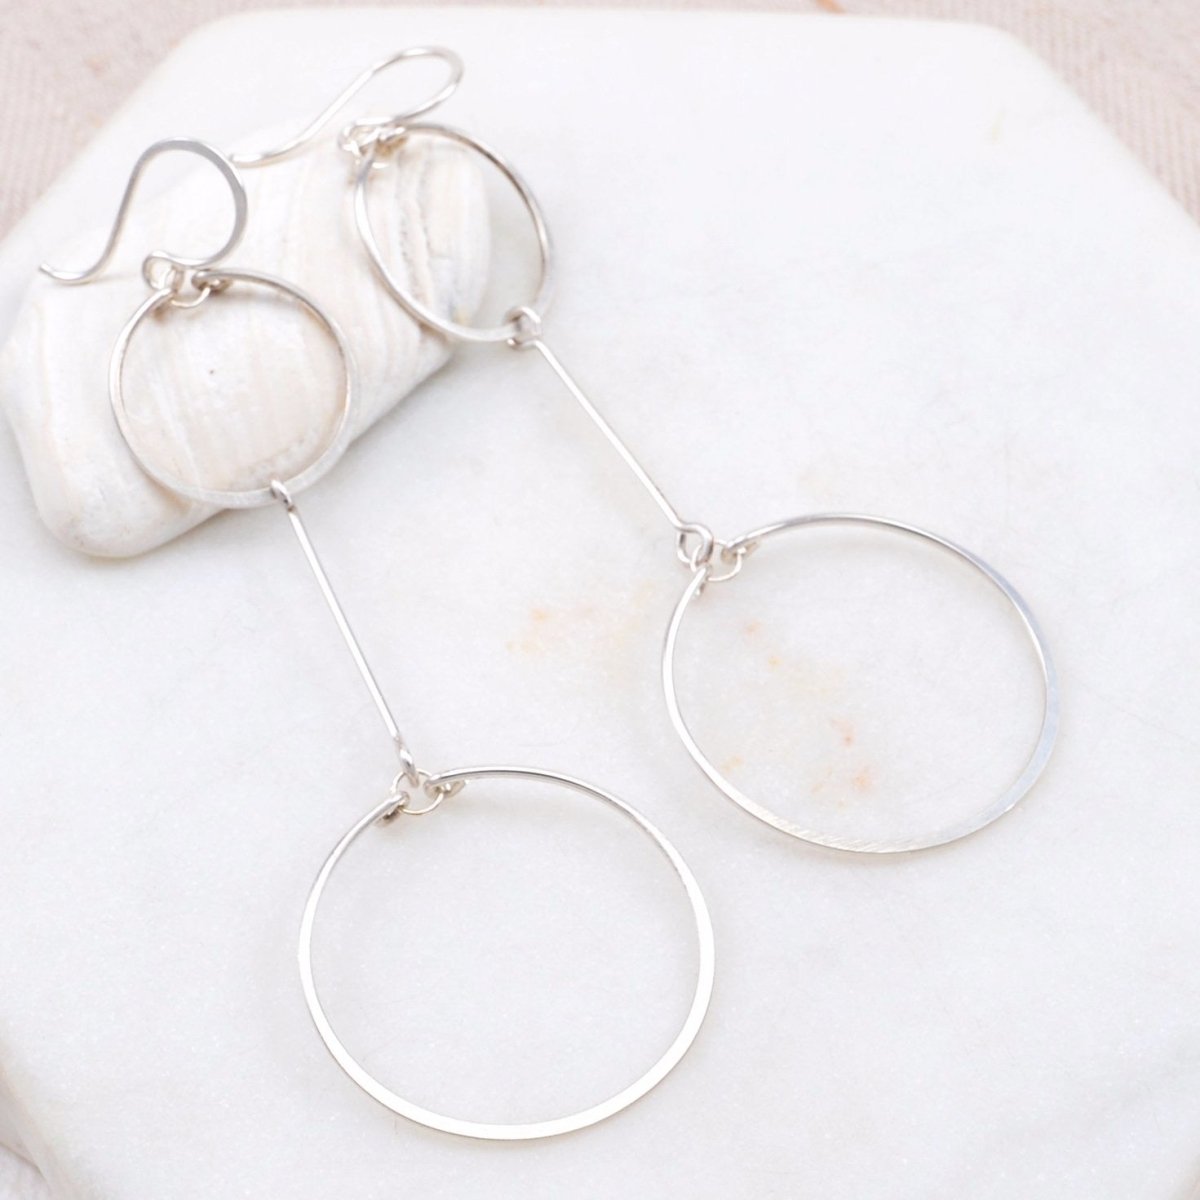 Two hand forged and hammered silver circles come together with a gold bar in between. The Double Circle Drop Earrings in Silver are designed and handmade by Amy Olson in Portland, Oregon.